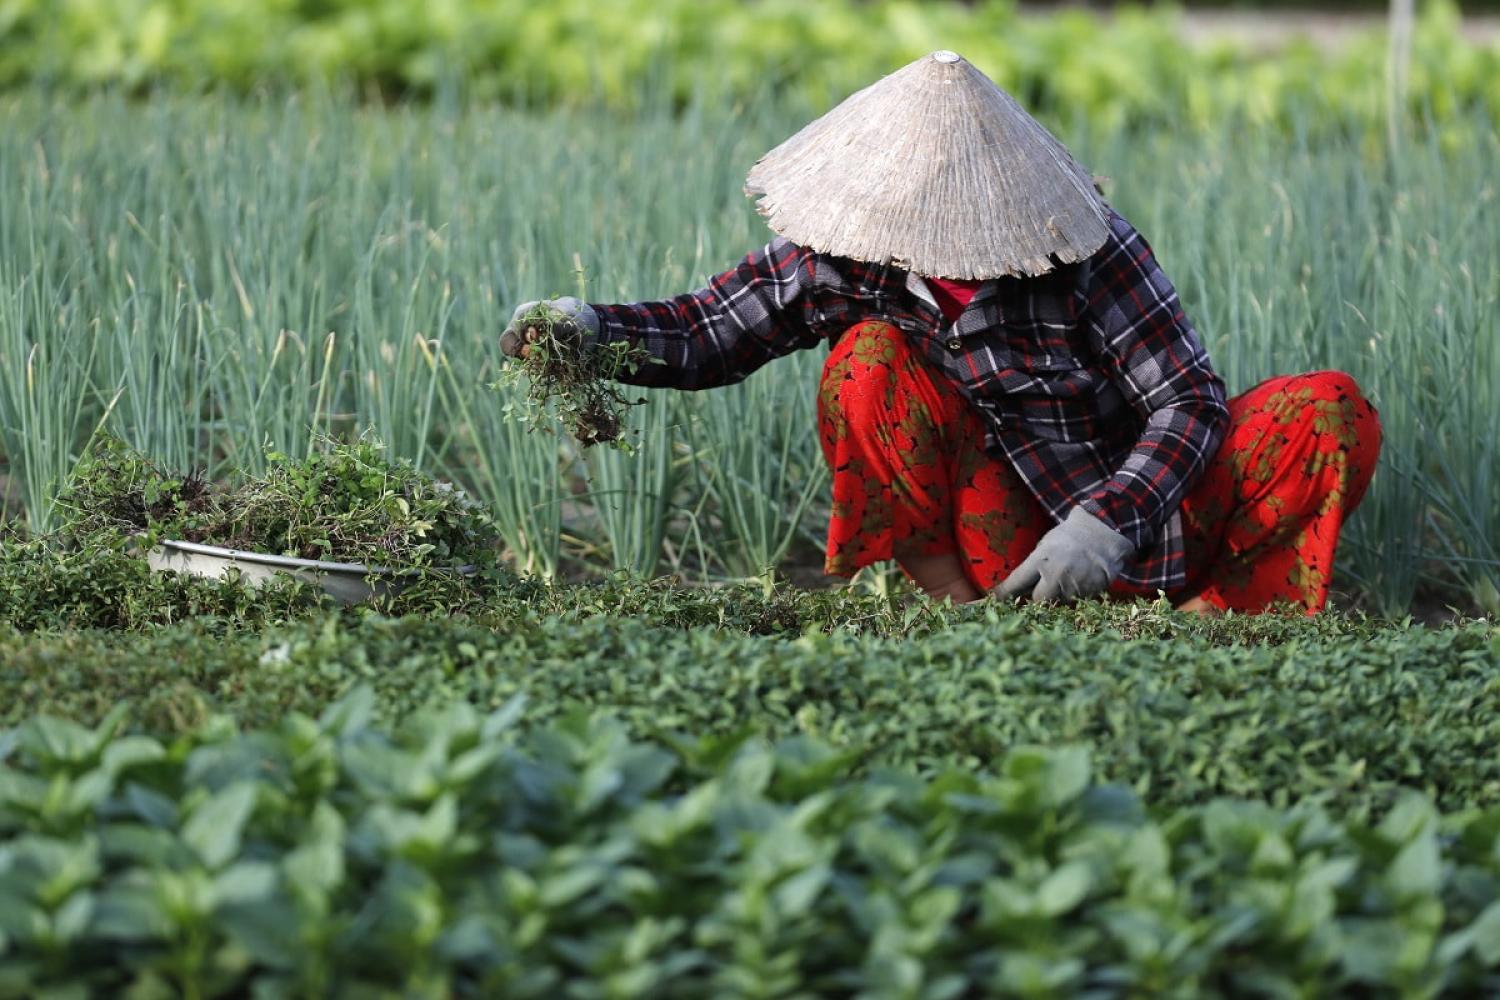 A woman farms organic vegetables in Tra Que Village, Hoi An, Vietnam (Godong/Universal Images Group via Getty Images)